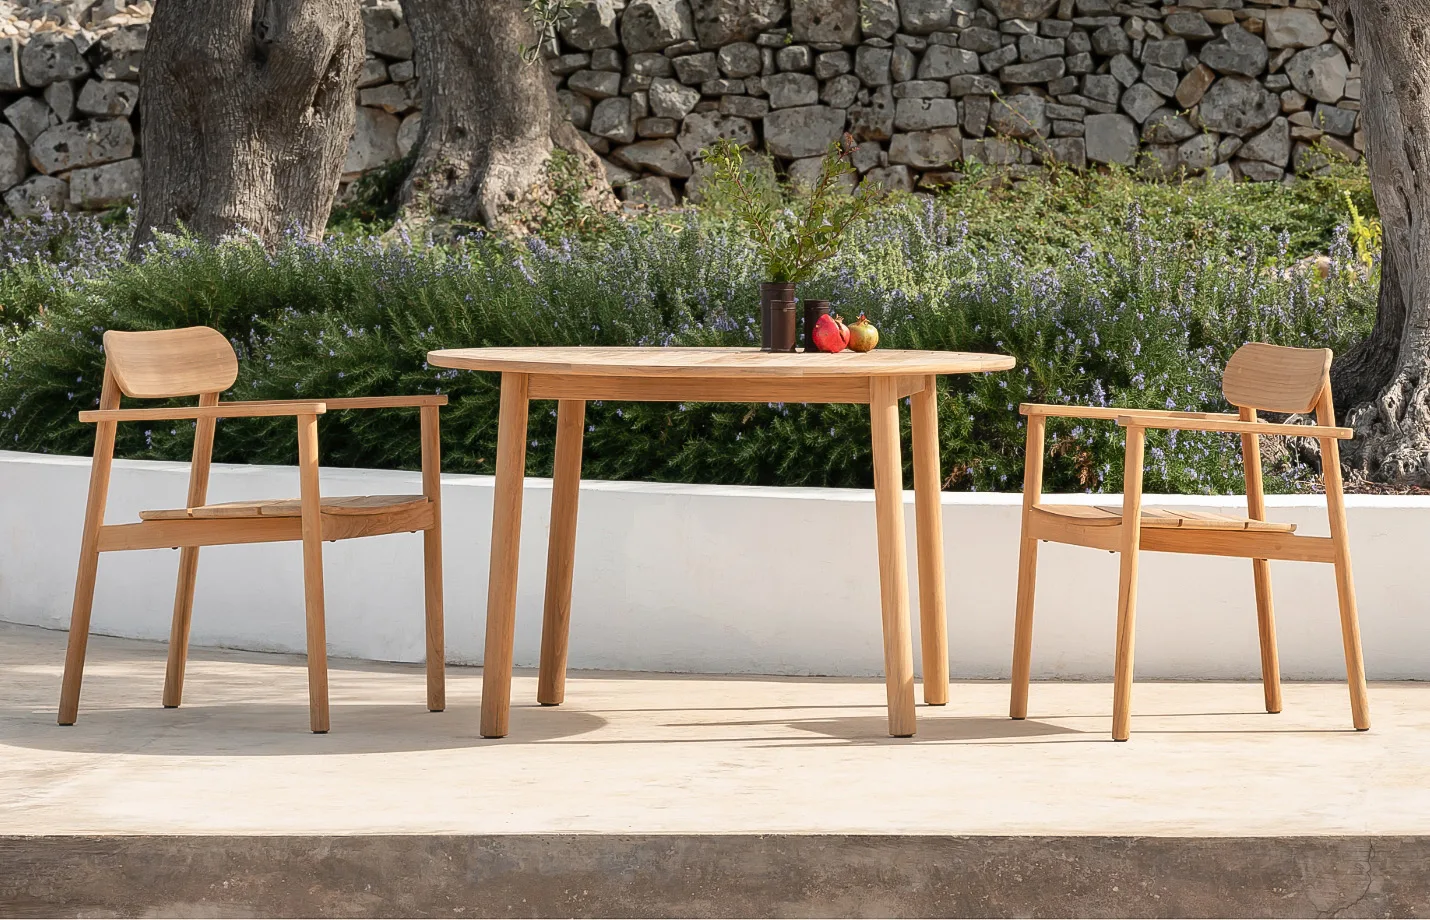 The Sam dining table can be used in patios and other outdoor spaces